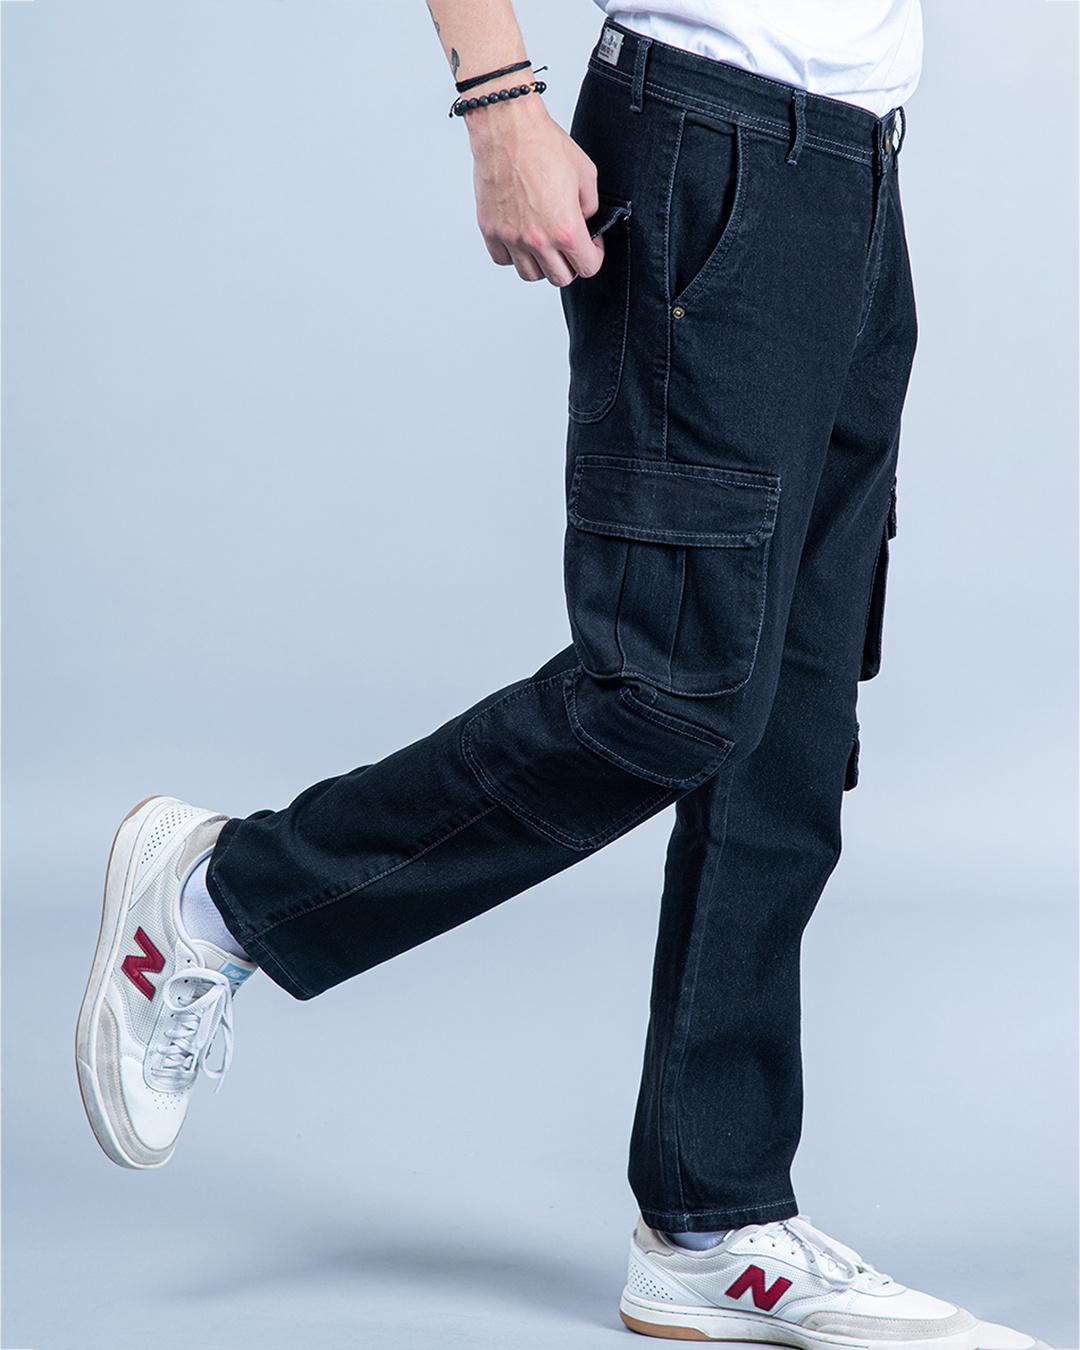 Buy Men's Carbon Black Relaxed Fit Cargo Jeans Online at Bewakoof